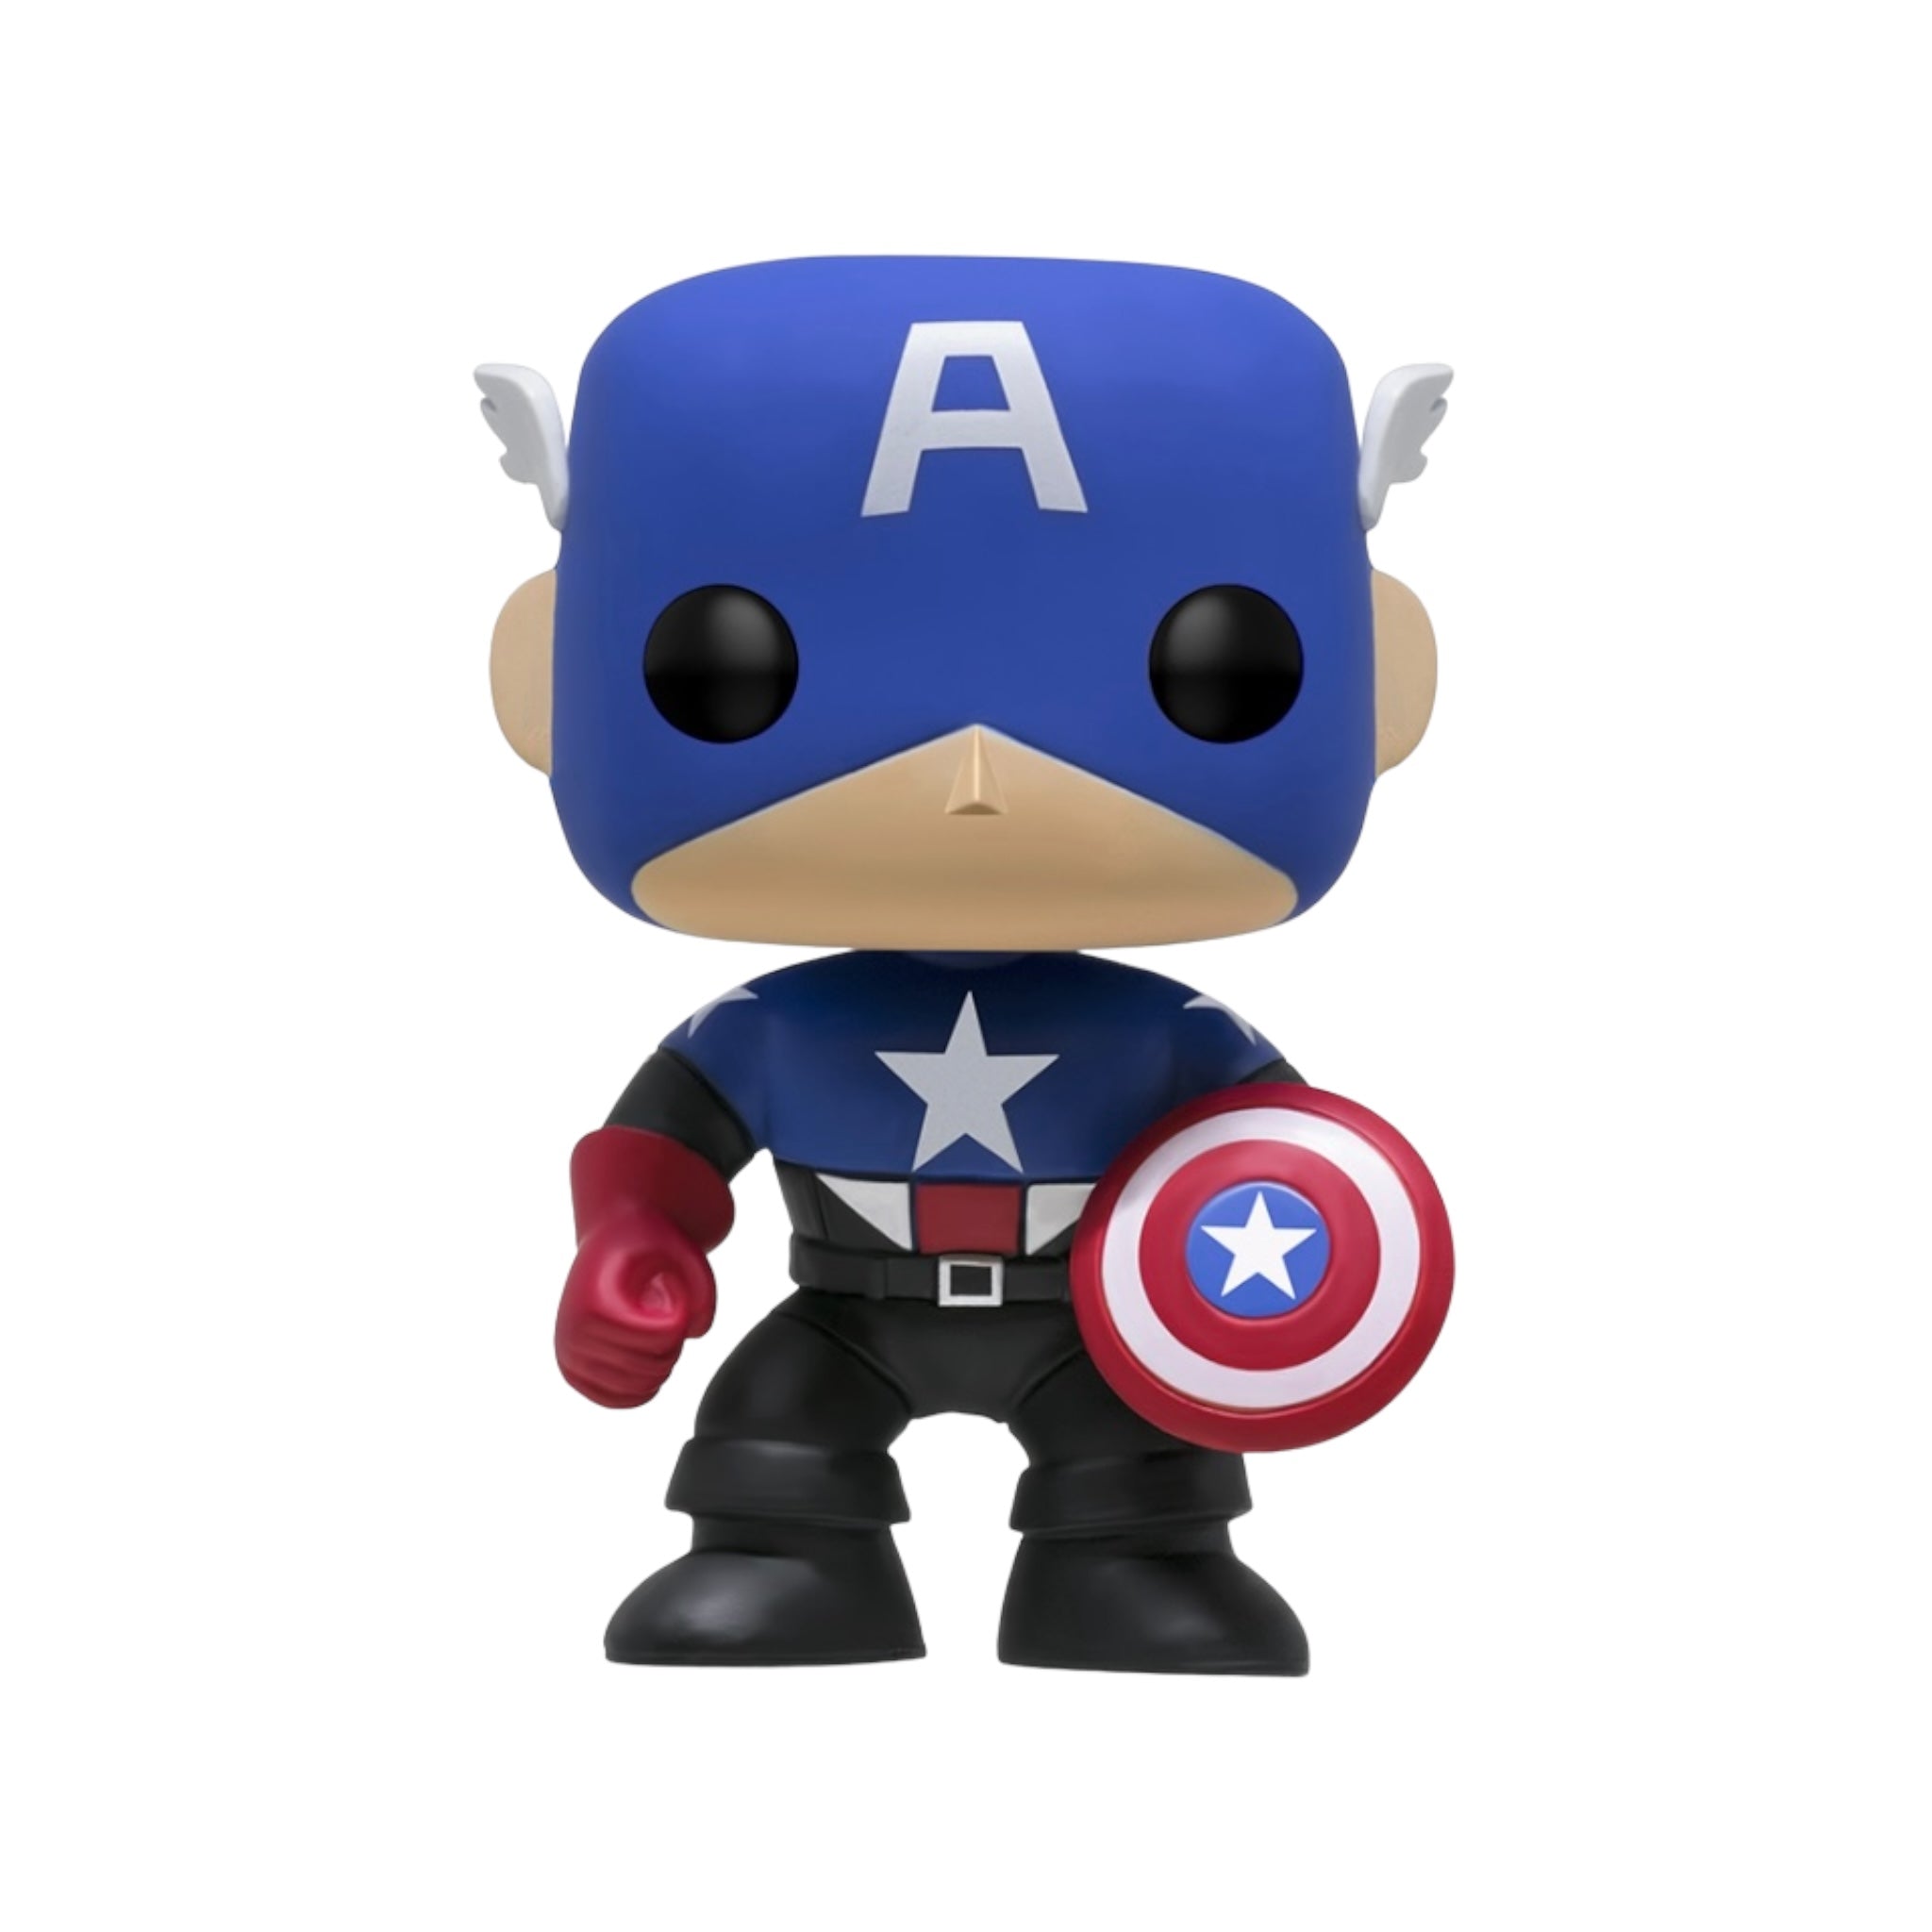 Captain America #06 (Bucky) Funko Pop! - Marvel - SDCC 2017 Shared Exclusive